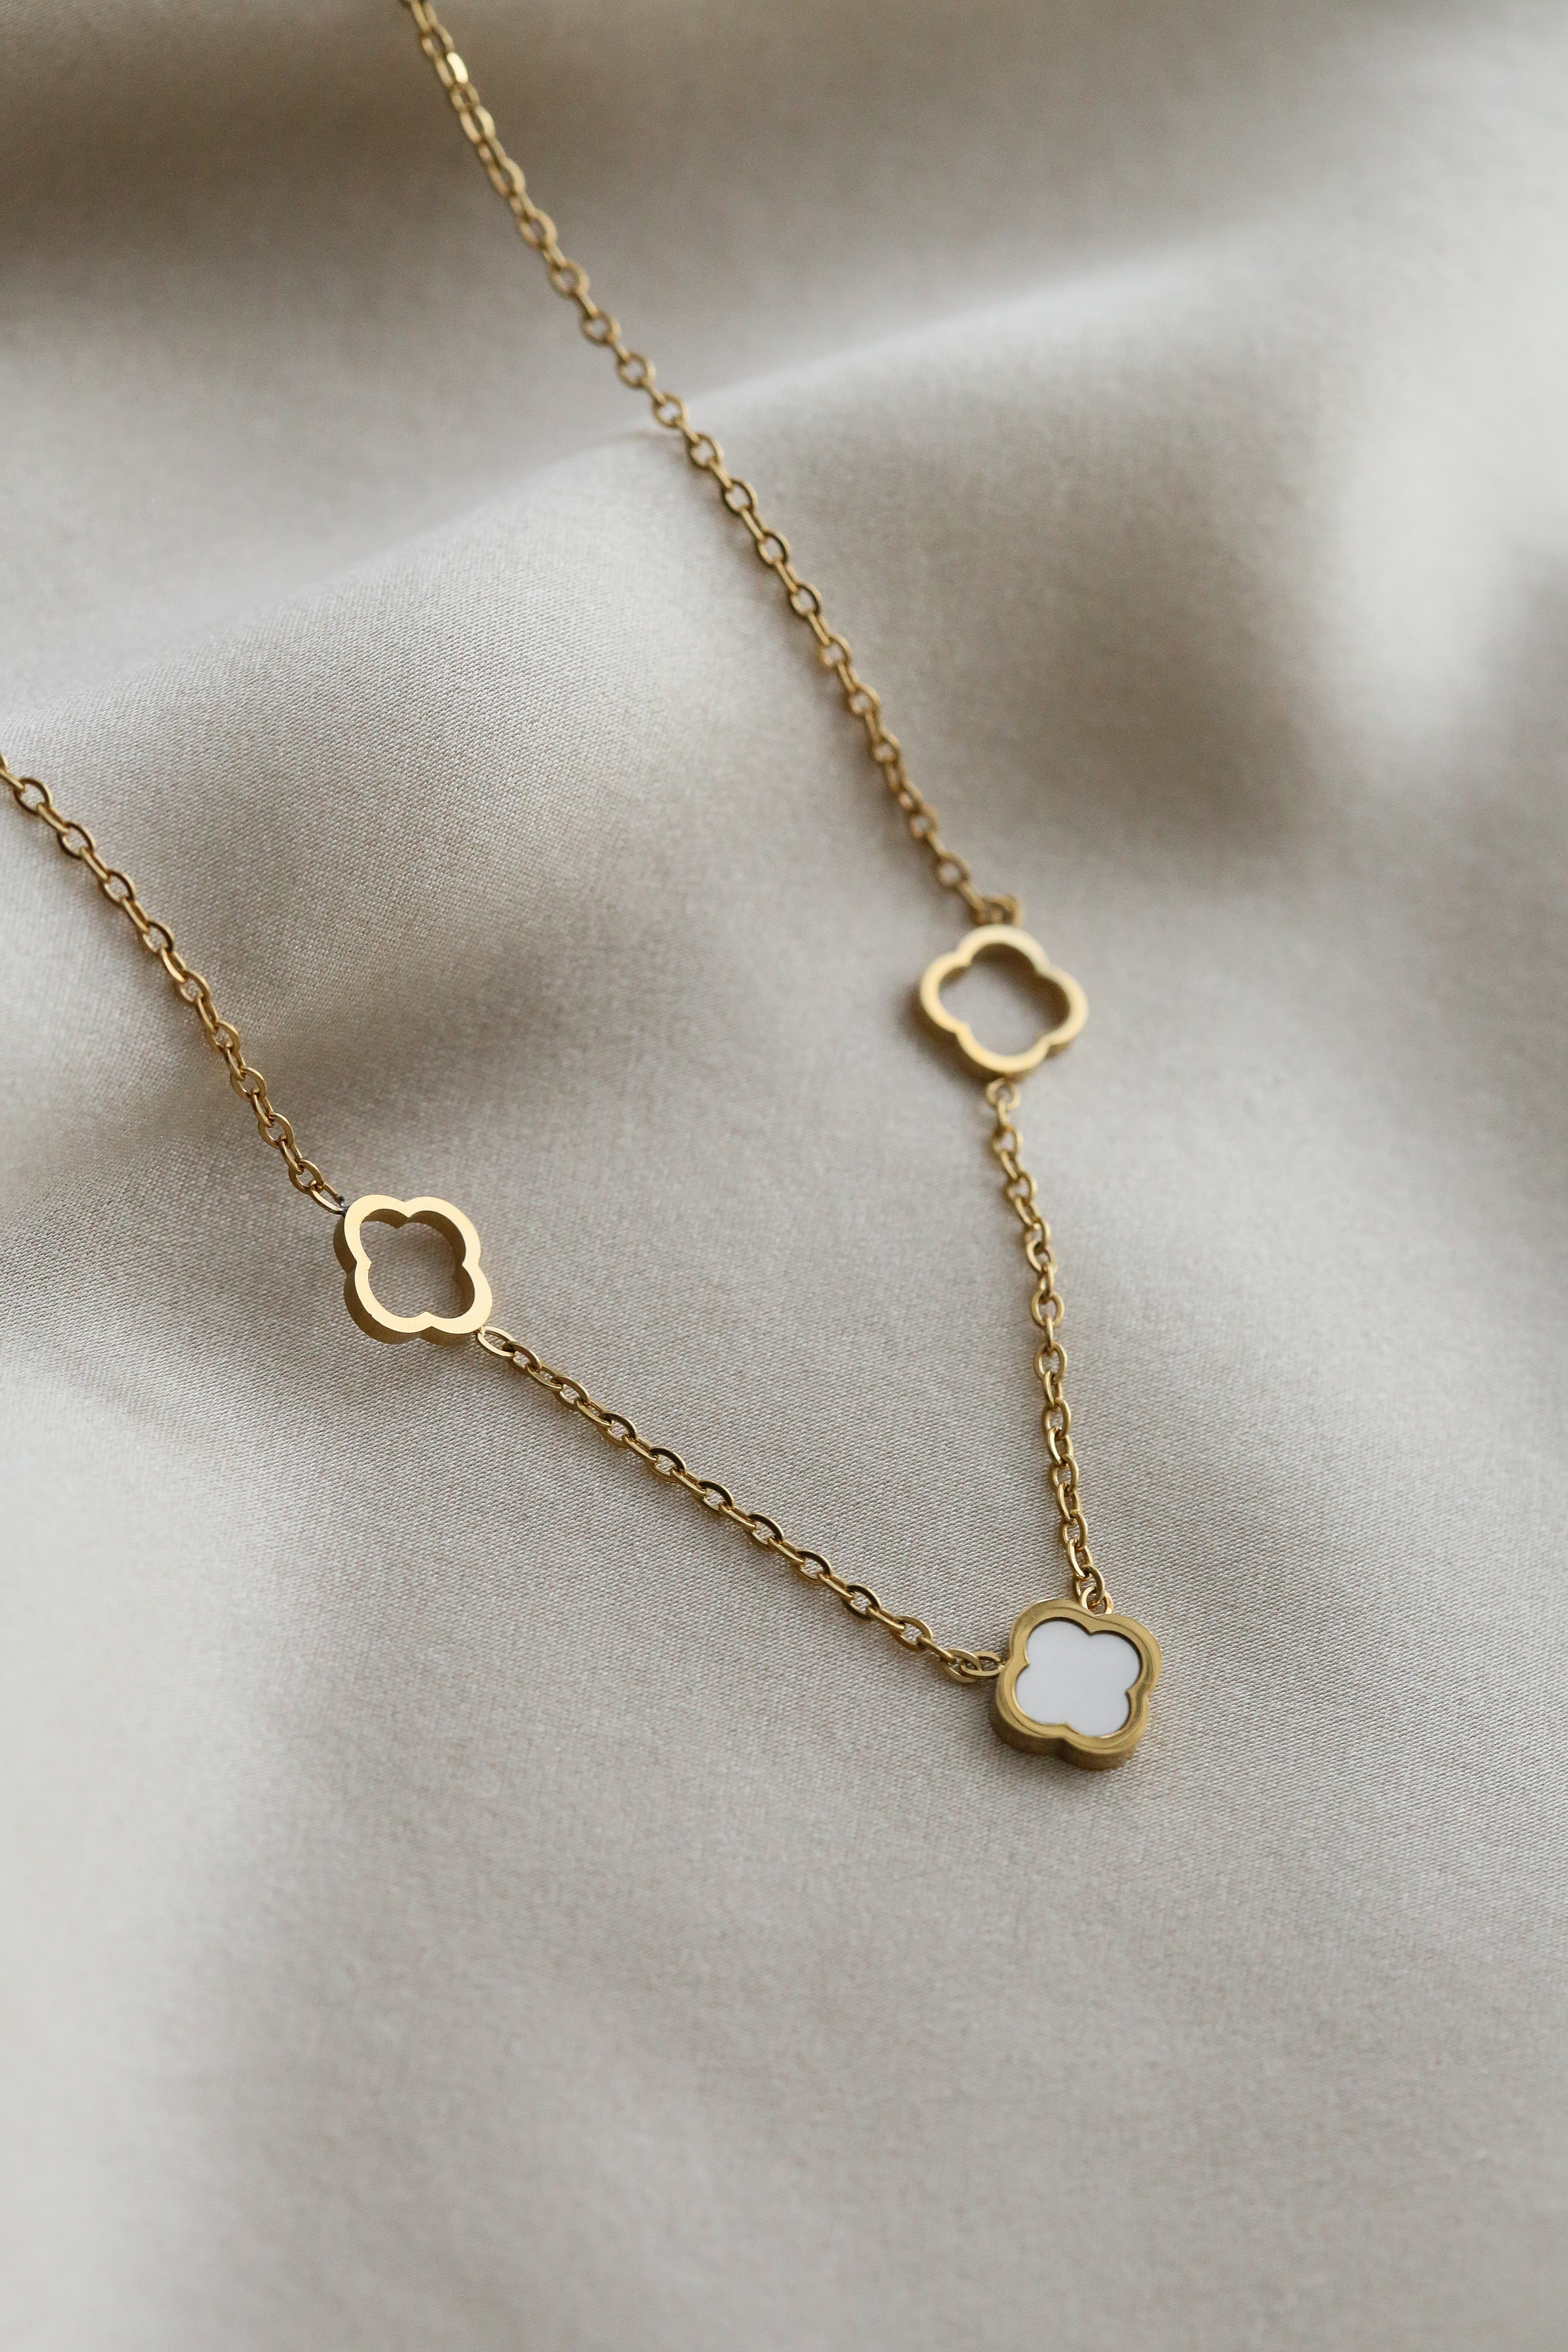 Viola Necklace - Boutique Minimaliste has waterproof, durable, elegant and vintage inspired jewelry